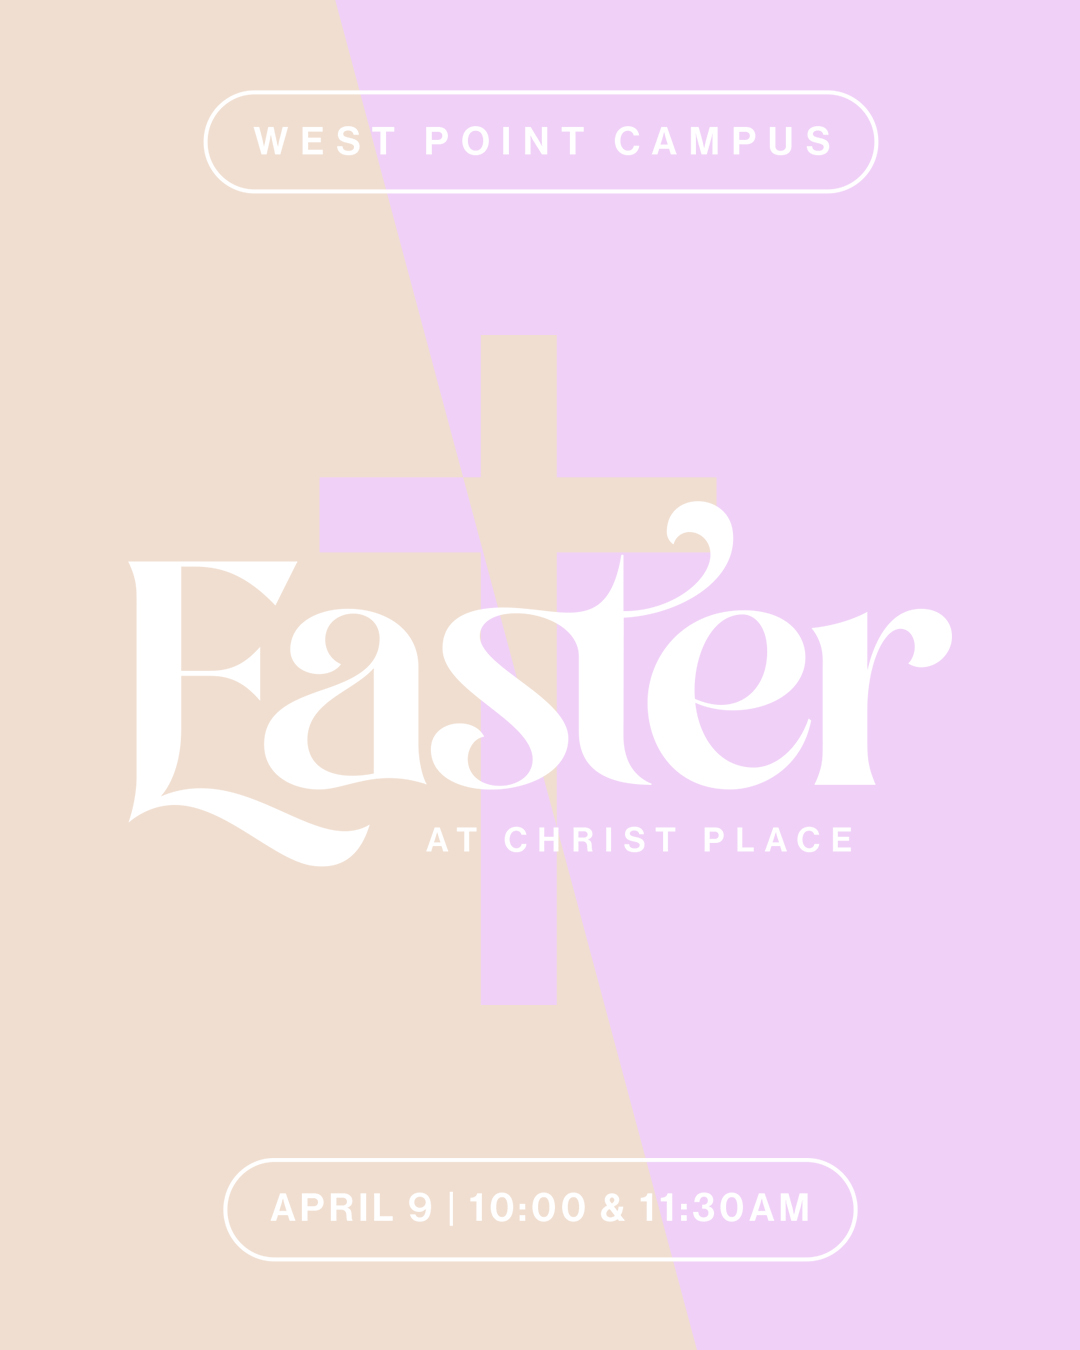 Easter - West Point Campus